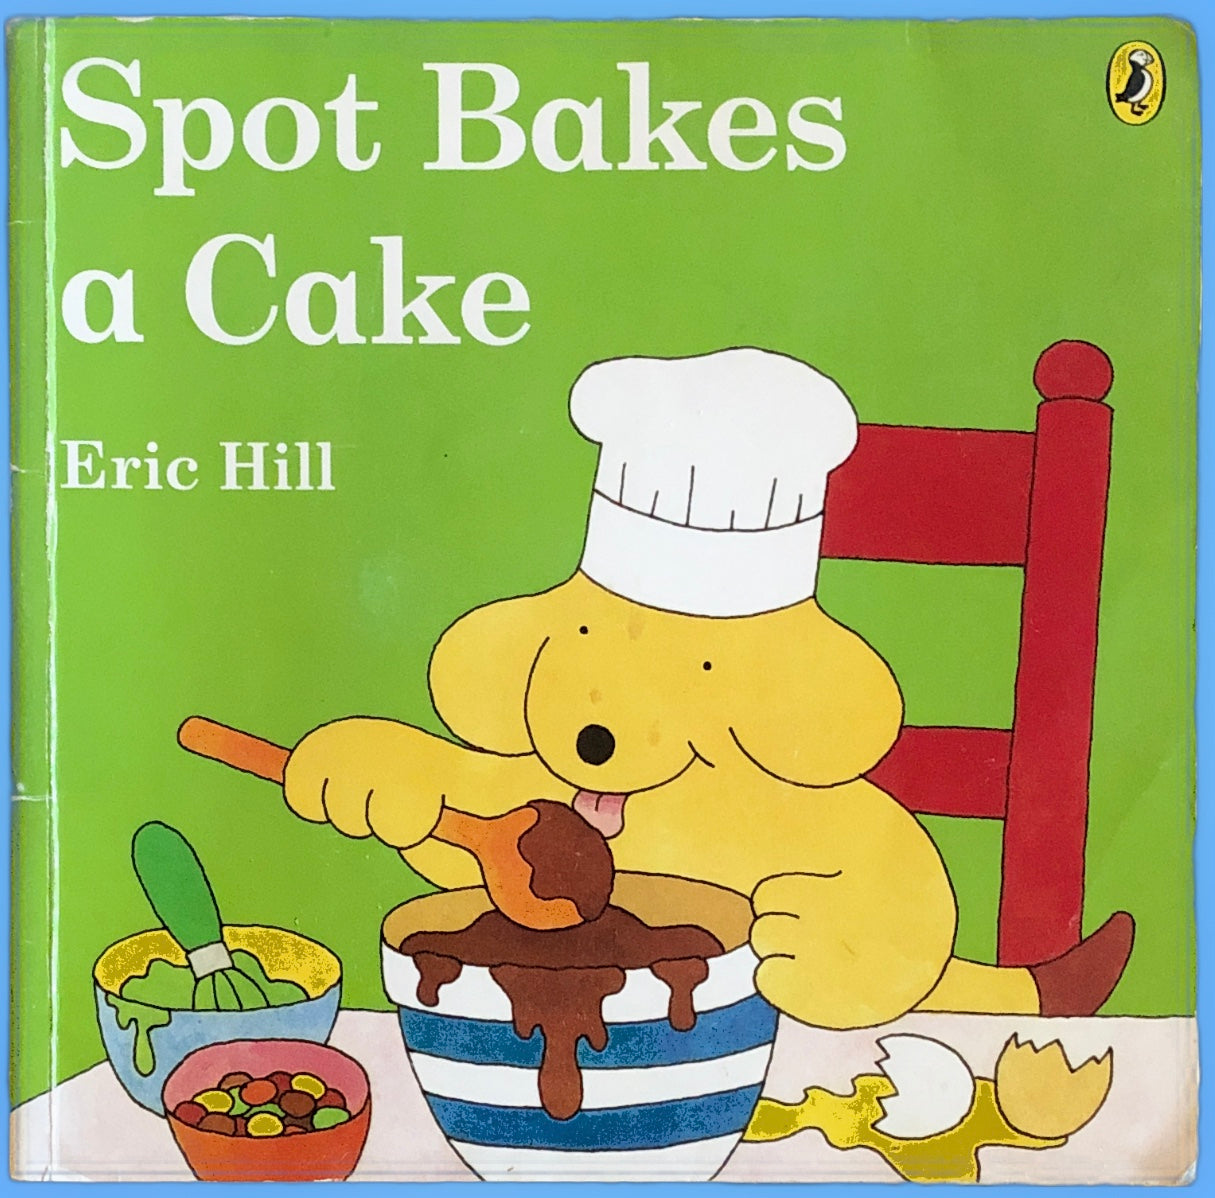 Spot Bakes a Cake by Eric Hill